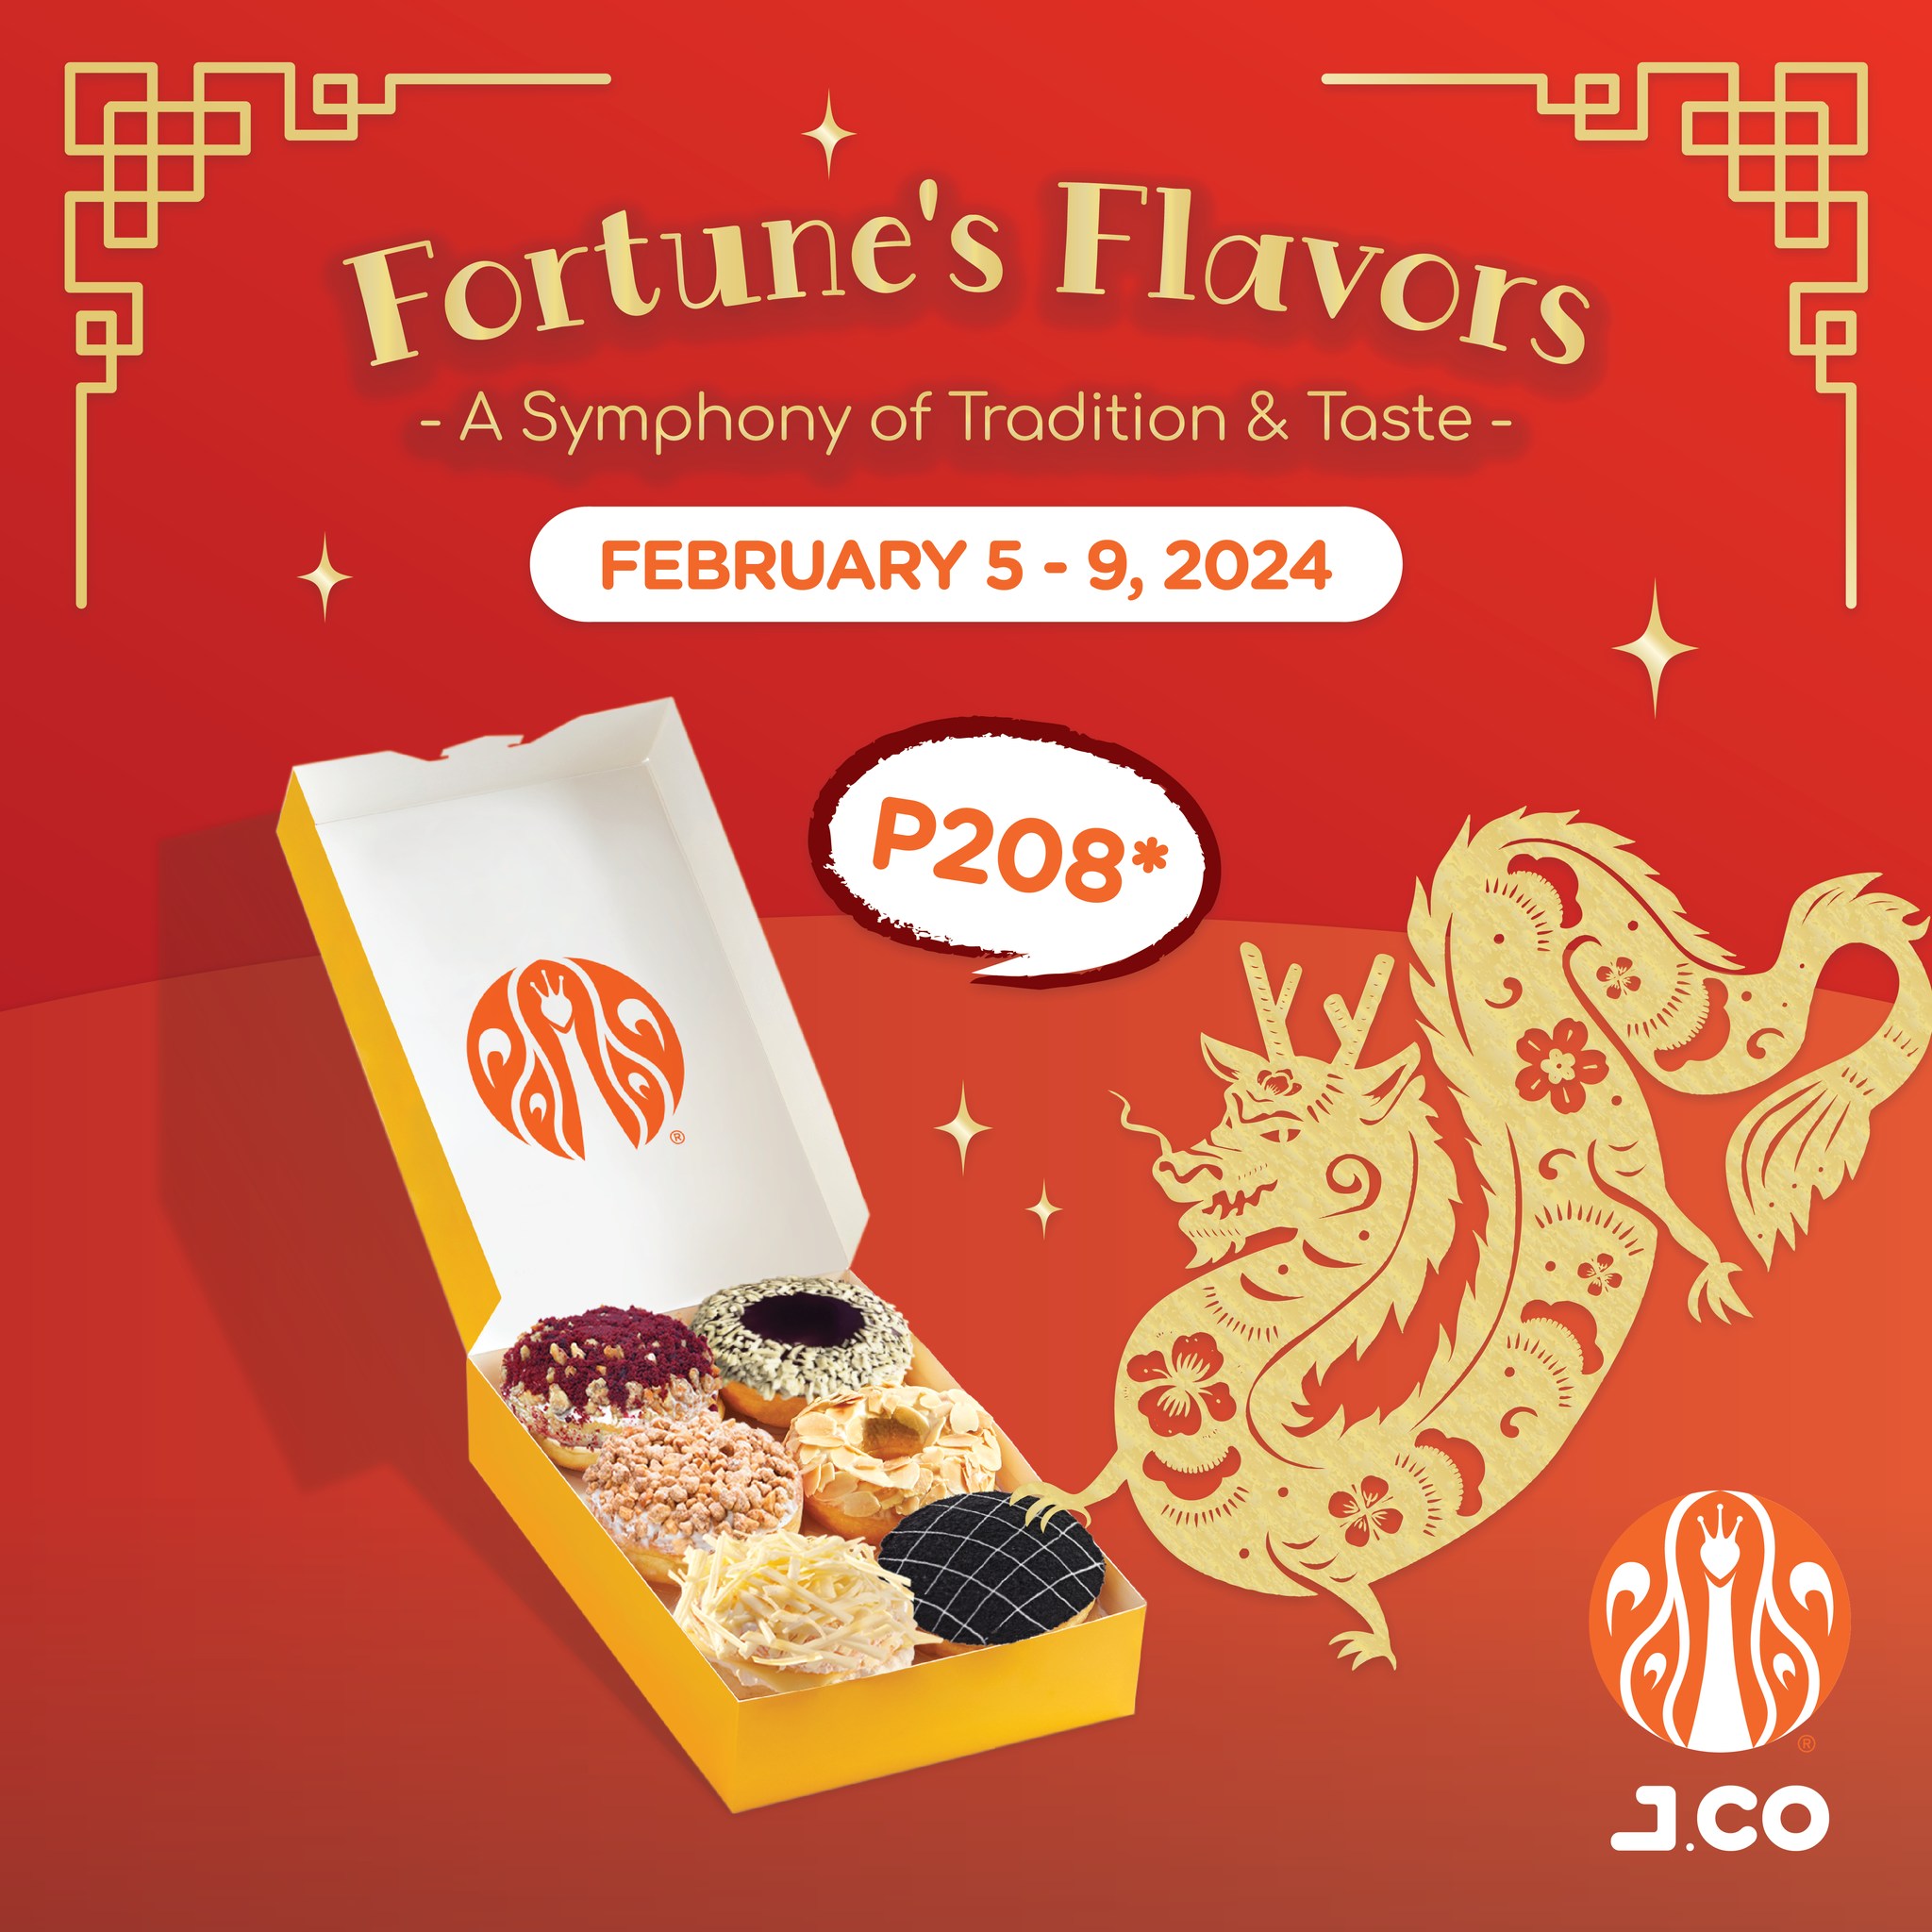 J.CO Donuts' Fortune Flavors Promo